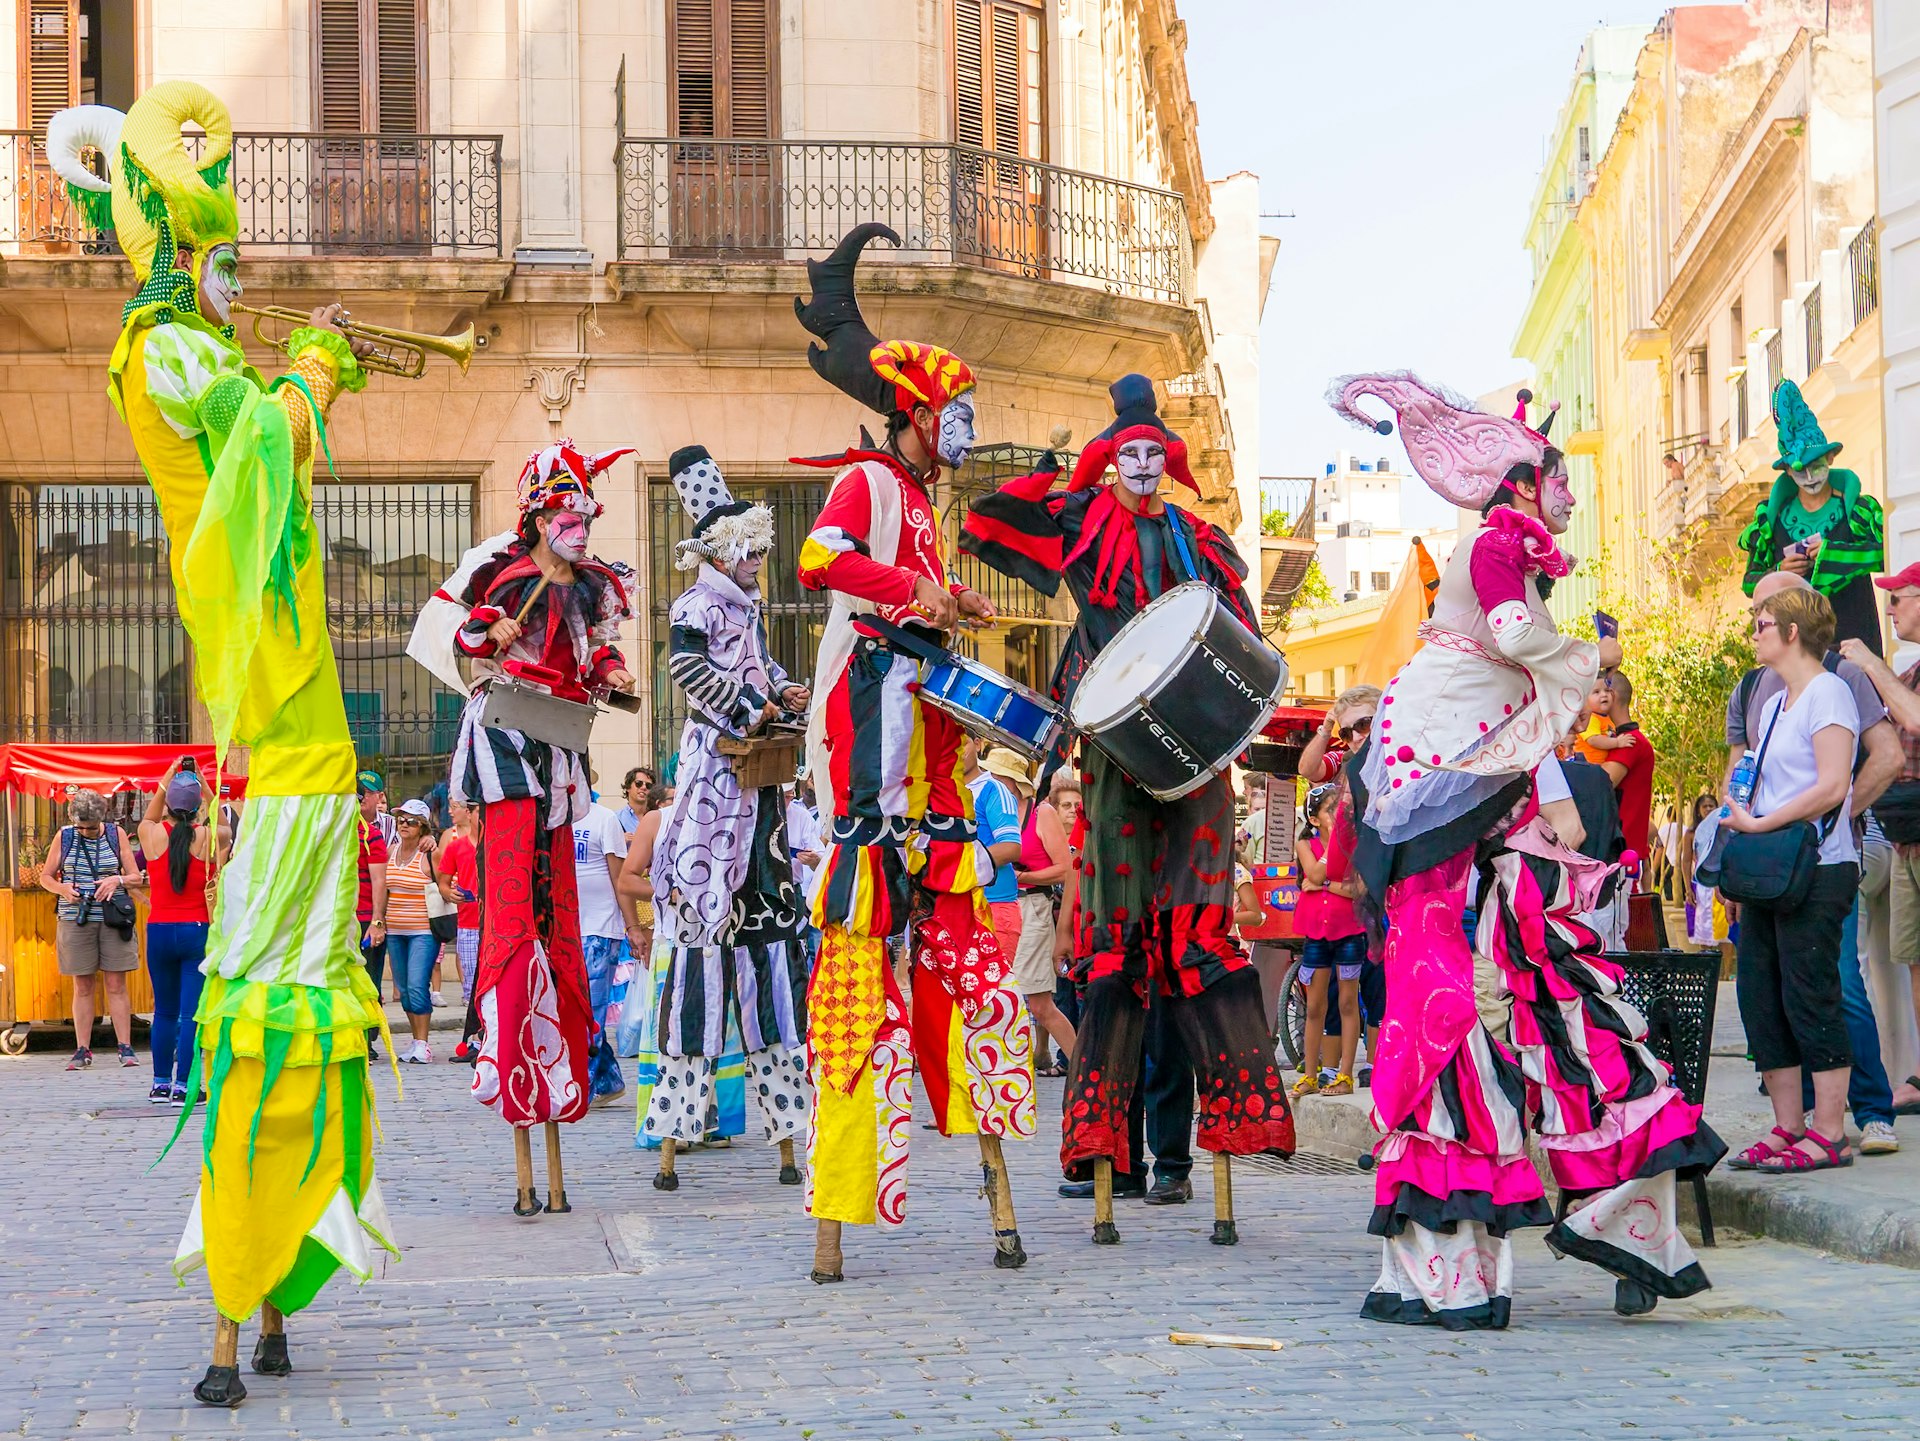 Colorful stiltwalkers dancing to the sound of cuban music in Old Havana